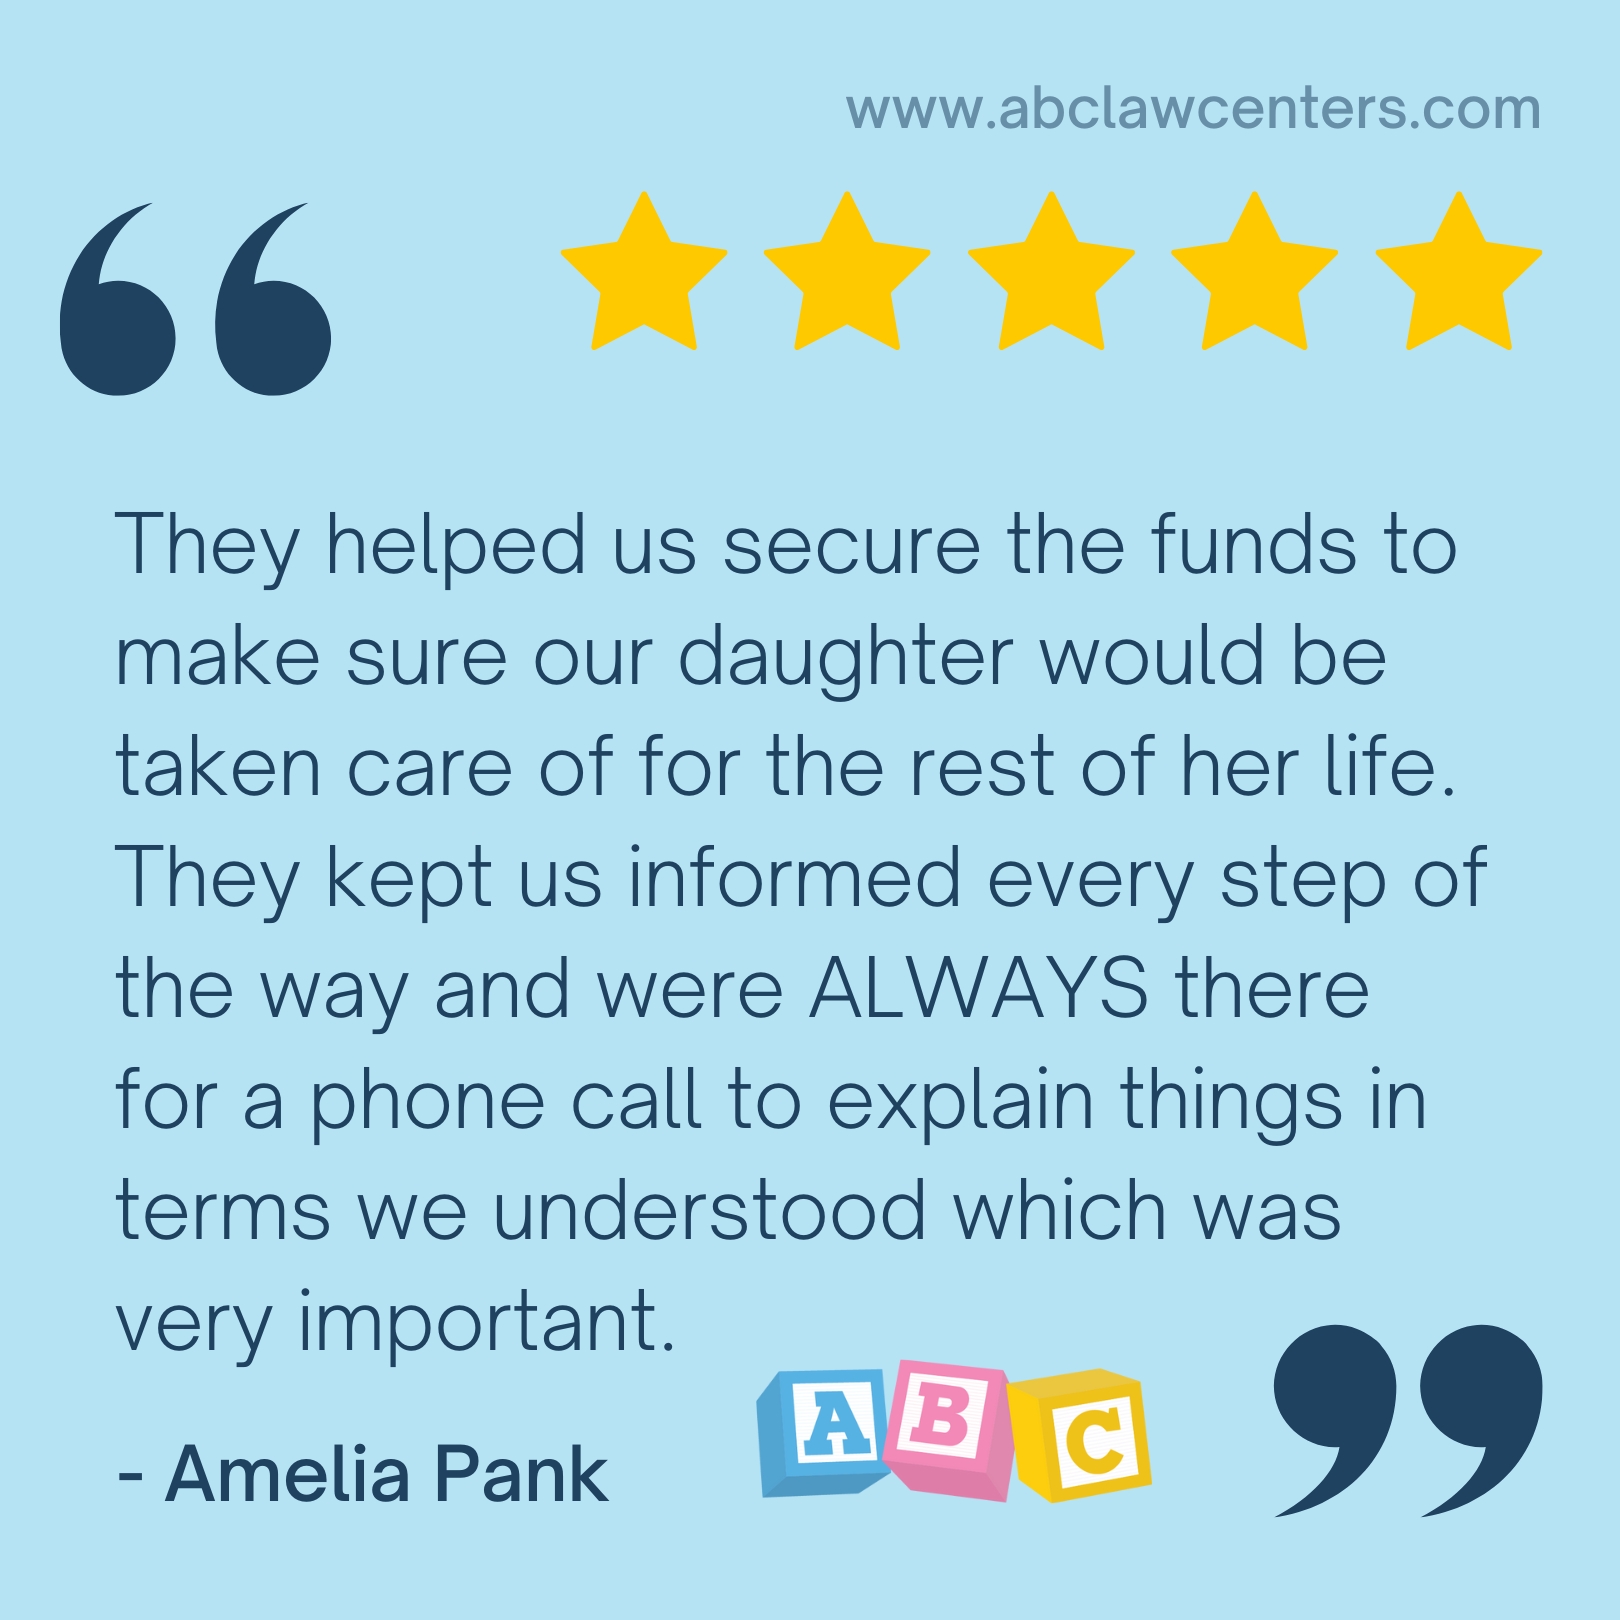 Five-star review from Amelia Pank reads: "They helped us secure the funds to make sure our daughter would be taken care of for the rest of her life. They kept us informed every step of the way and were ALWAYS there for a phone call to explain things in terms we understood which was very important."